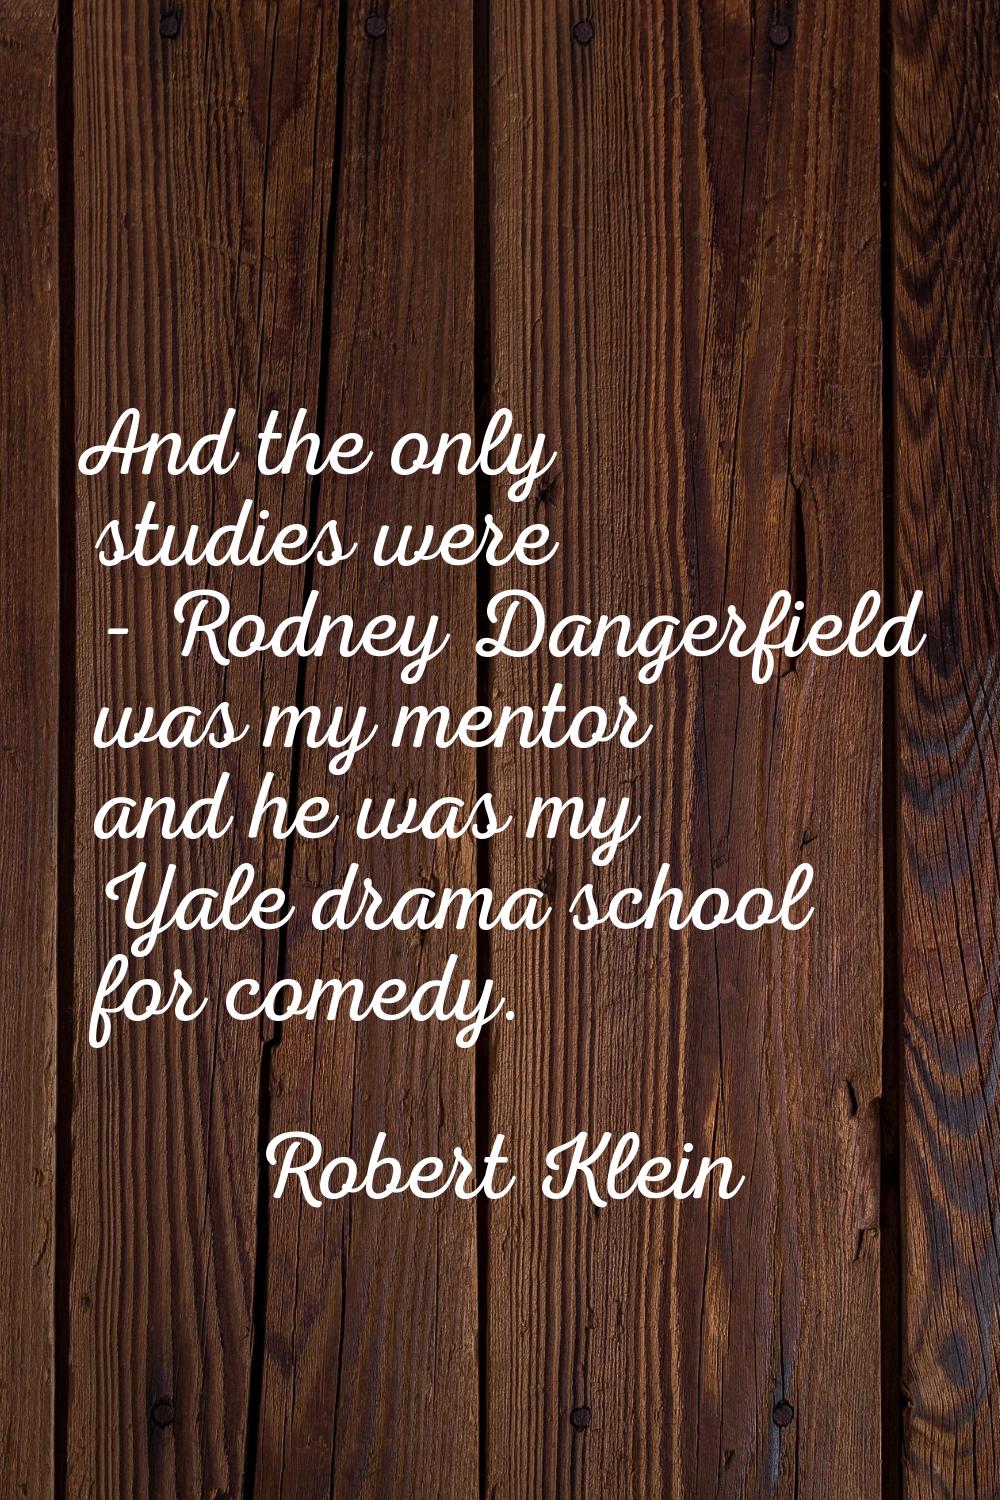 And the only studies were - Rodney Dangerfield was my mentor and he was my Yale drama school for co